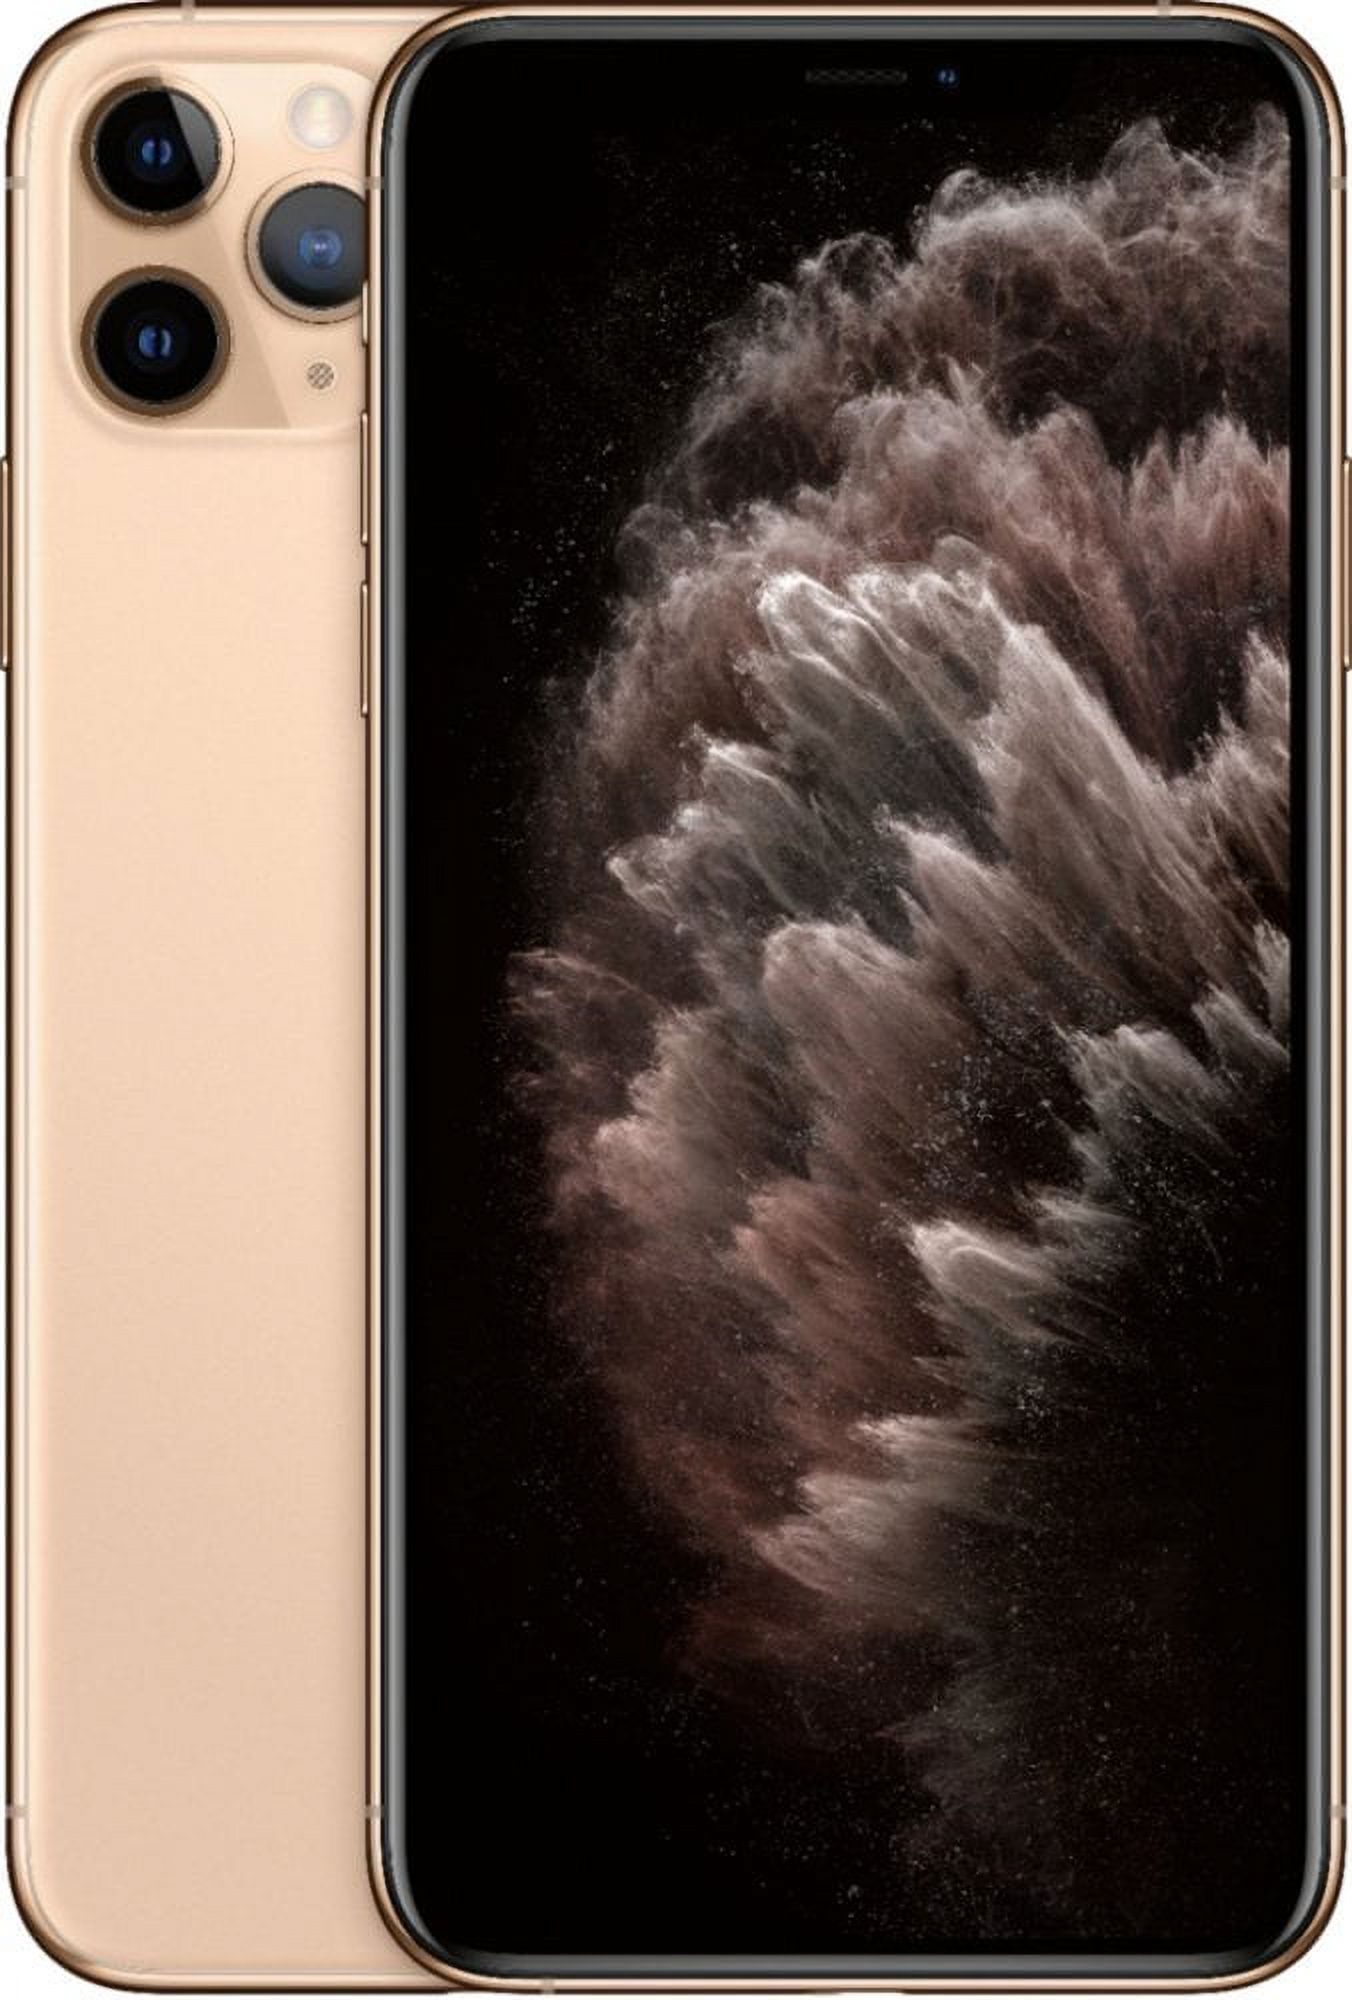 Restored Apple iPhone 11 Pro Max 64GB Gold LTE Cellular Sprint MWG42LL/A (Refurbished) - image 1 of 3